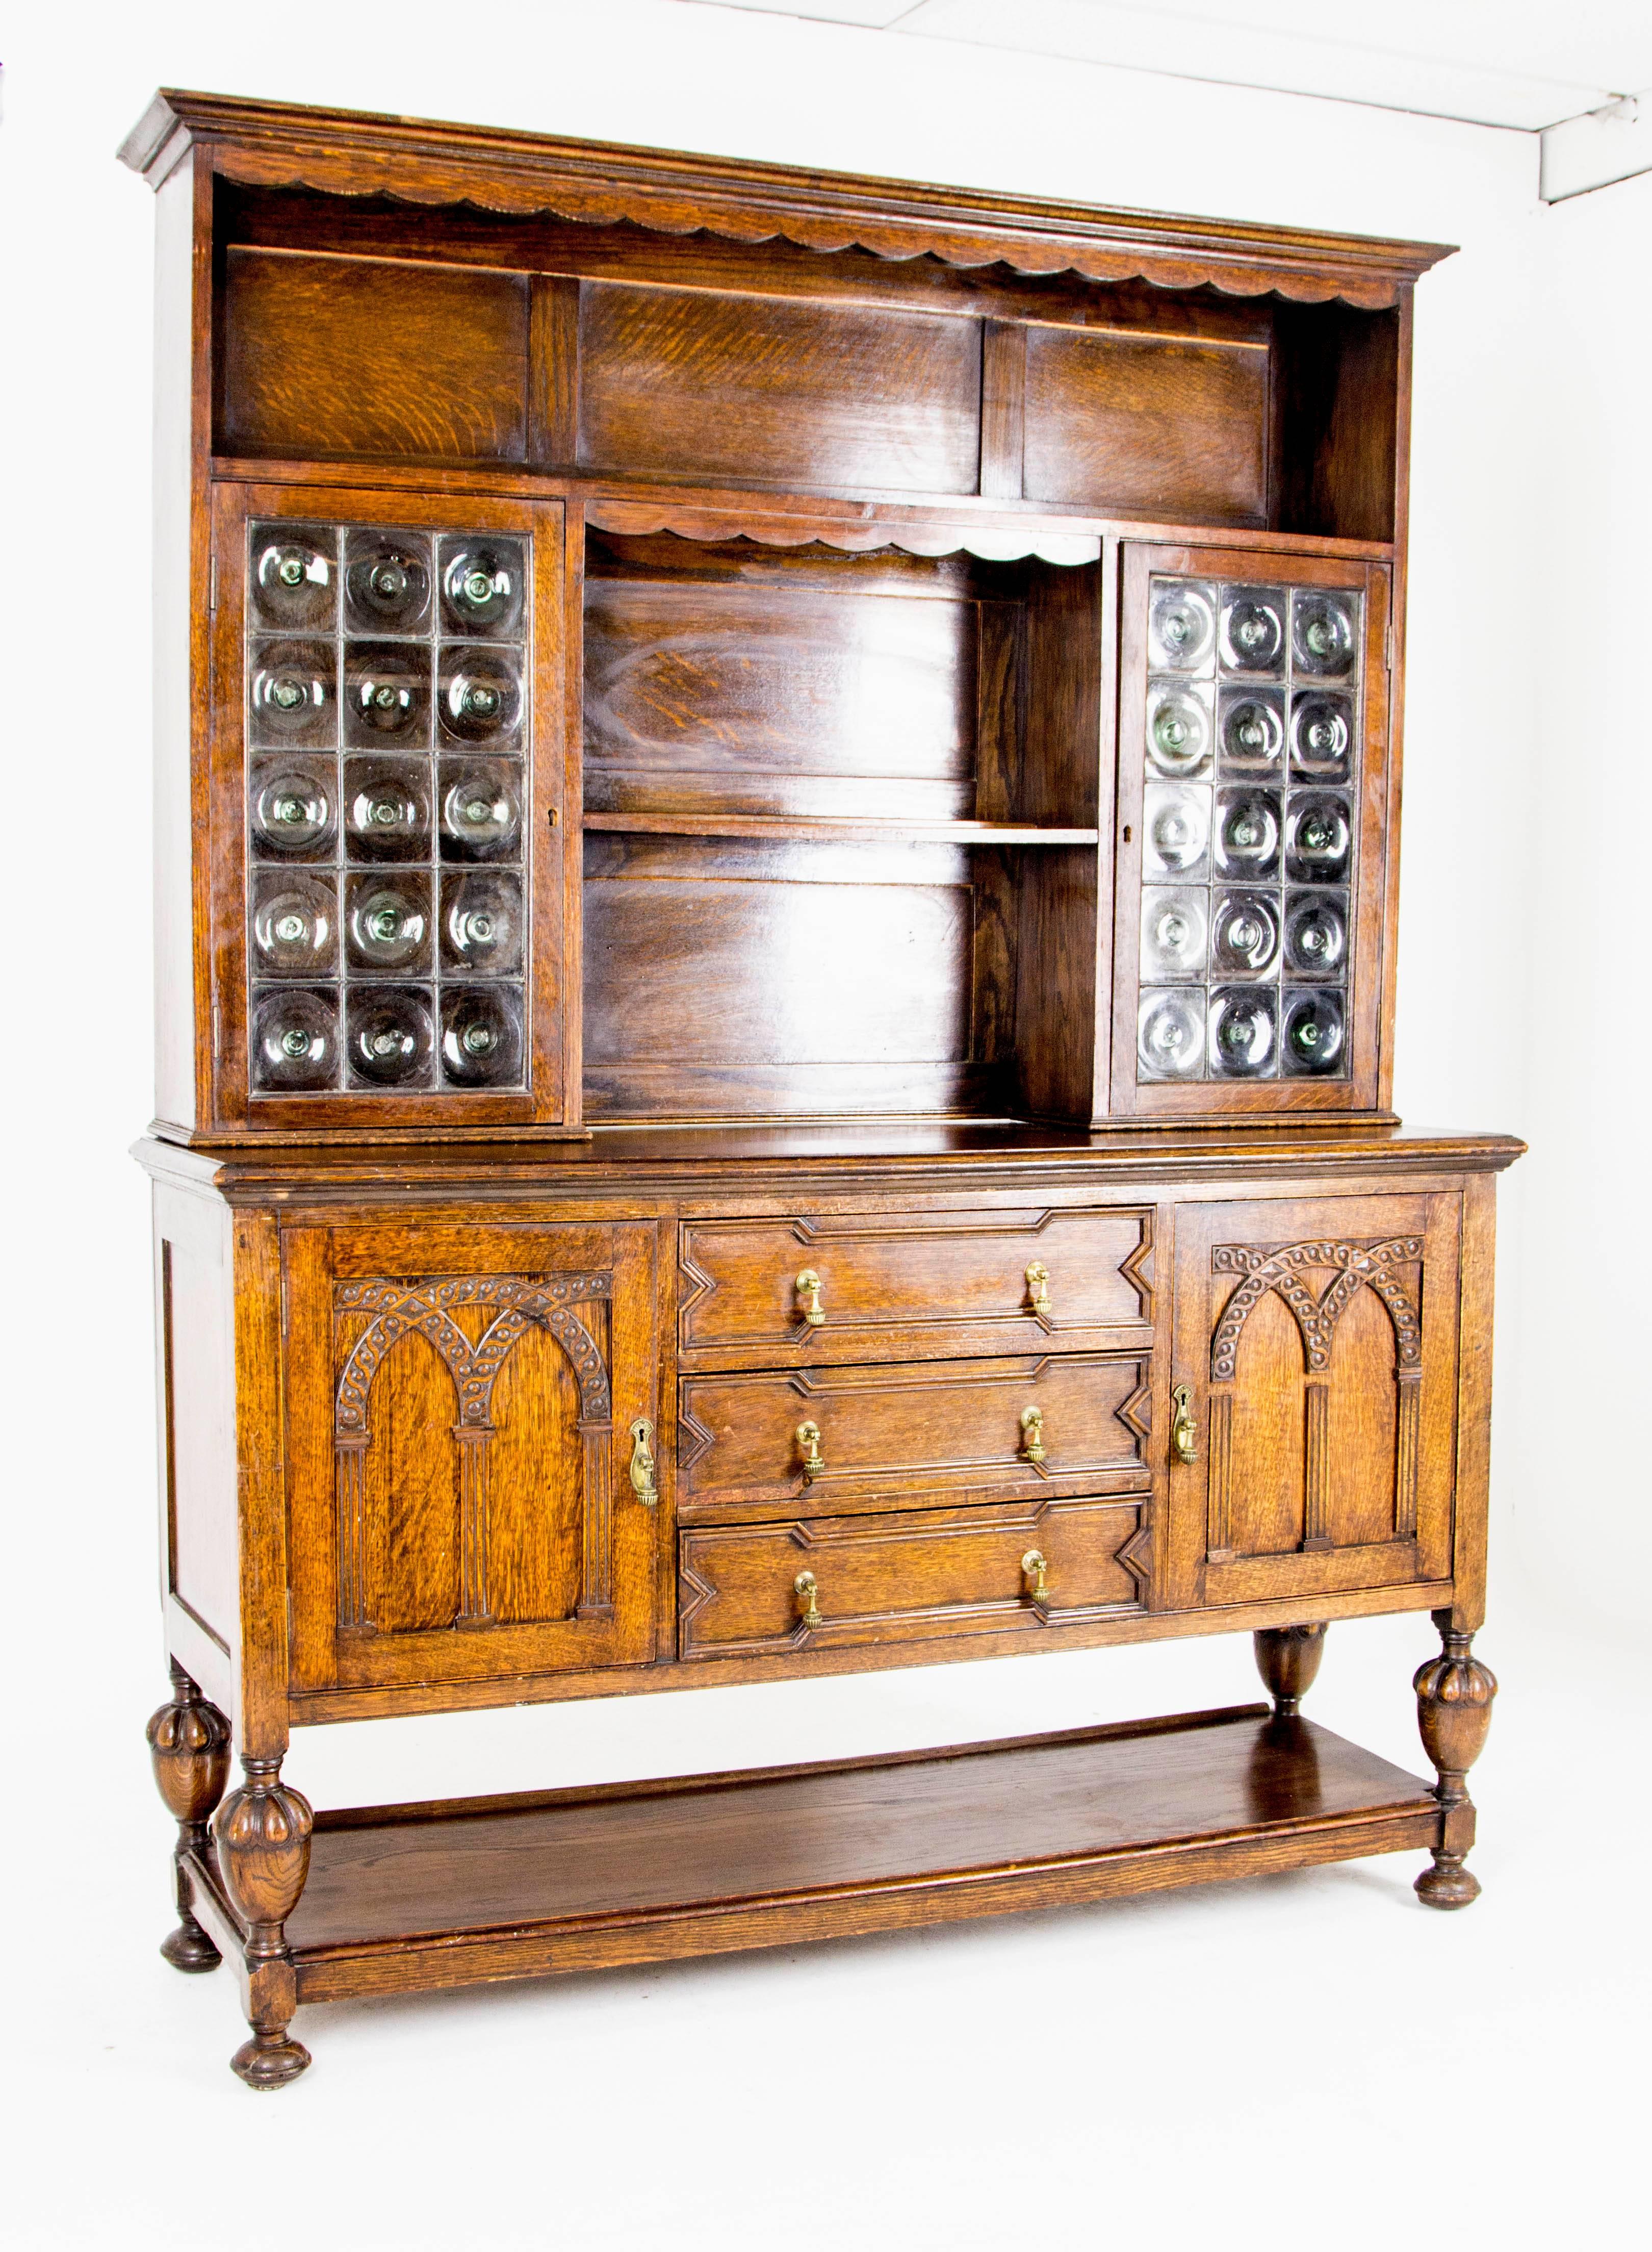 Scotland
1910
Solid oak construction
Original finish
Plate rack above with central plate rack below
Flanked by shelved cupboards with bullseye glass doors
Three central drawers flanked by shelved cupboards
Ending on bulbous legs connected by open